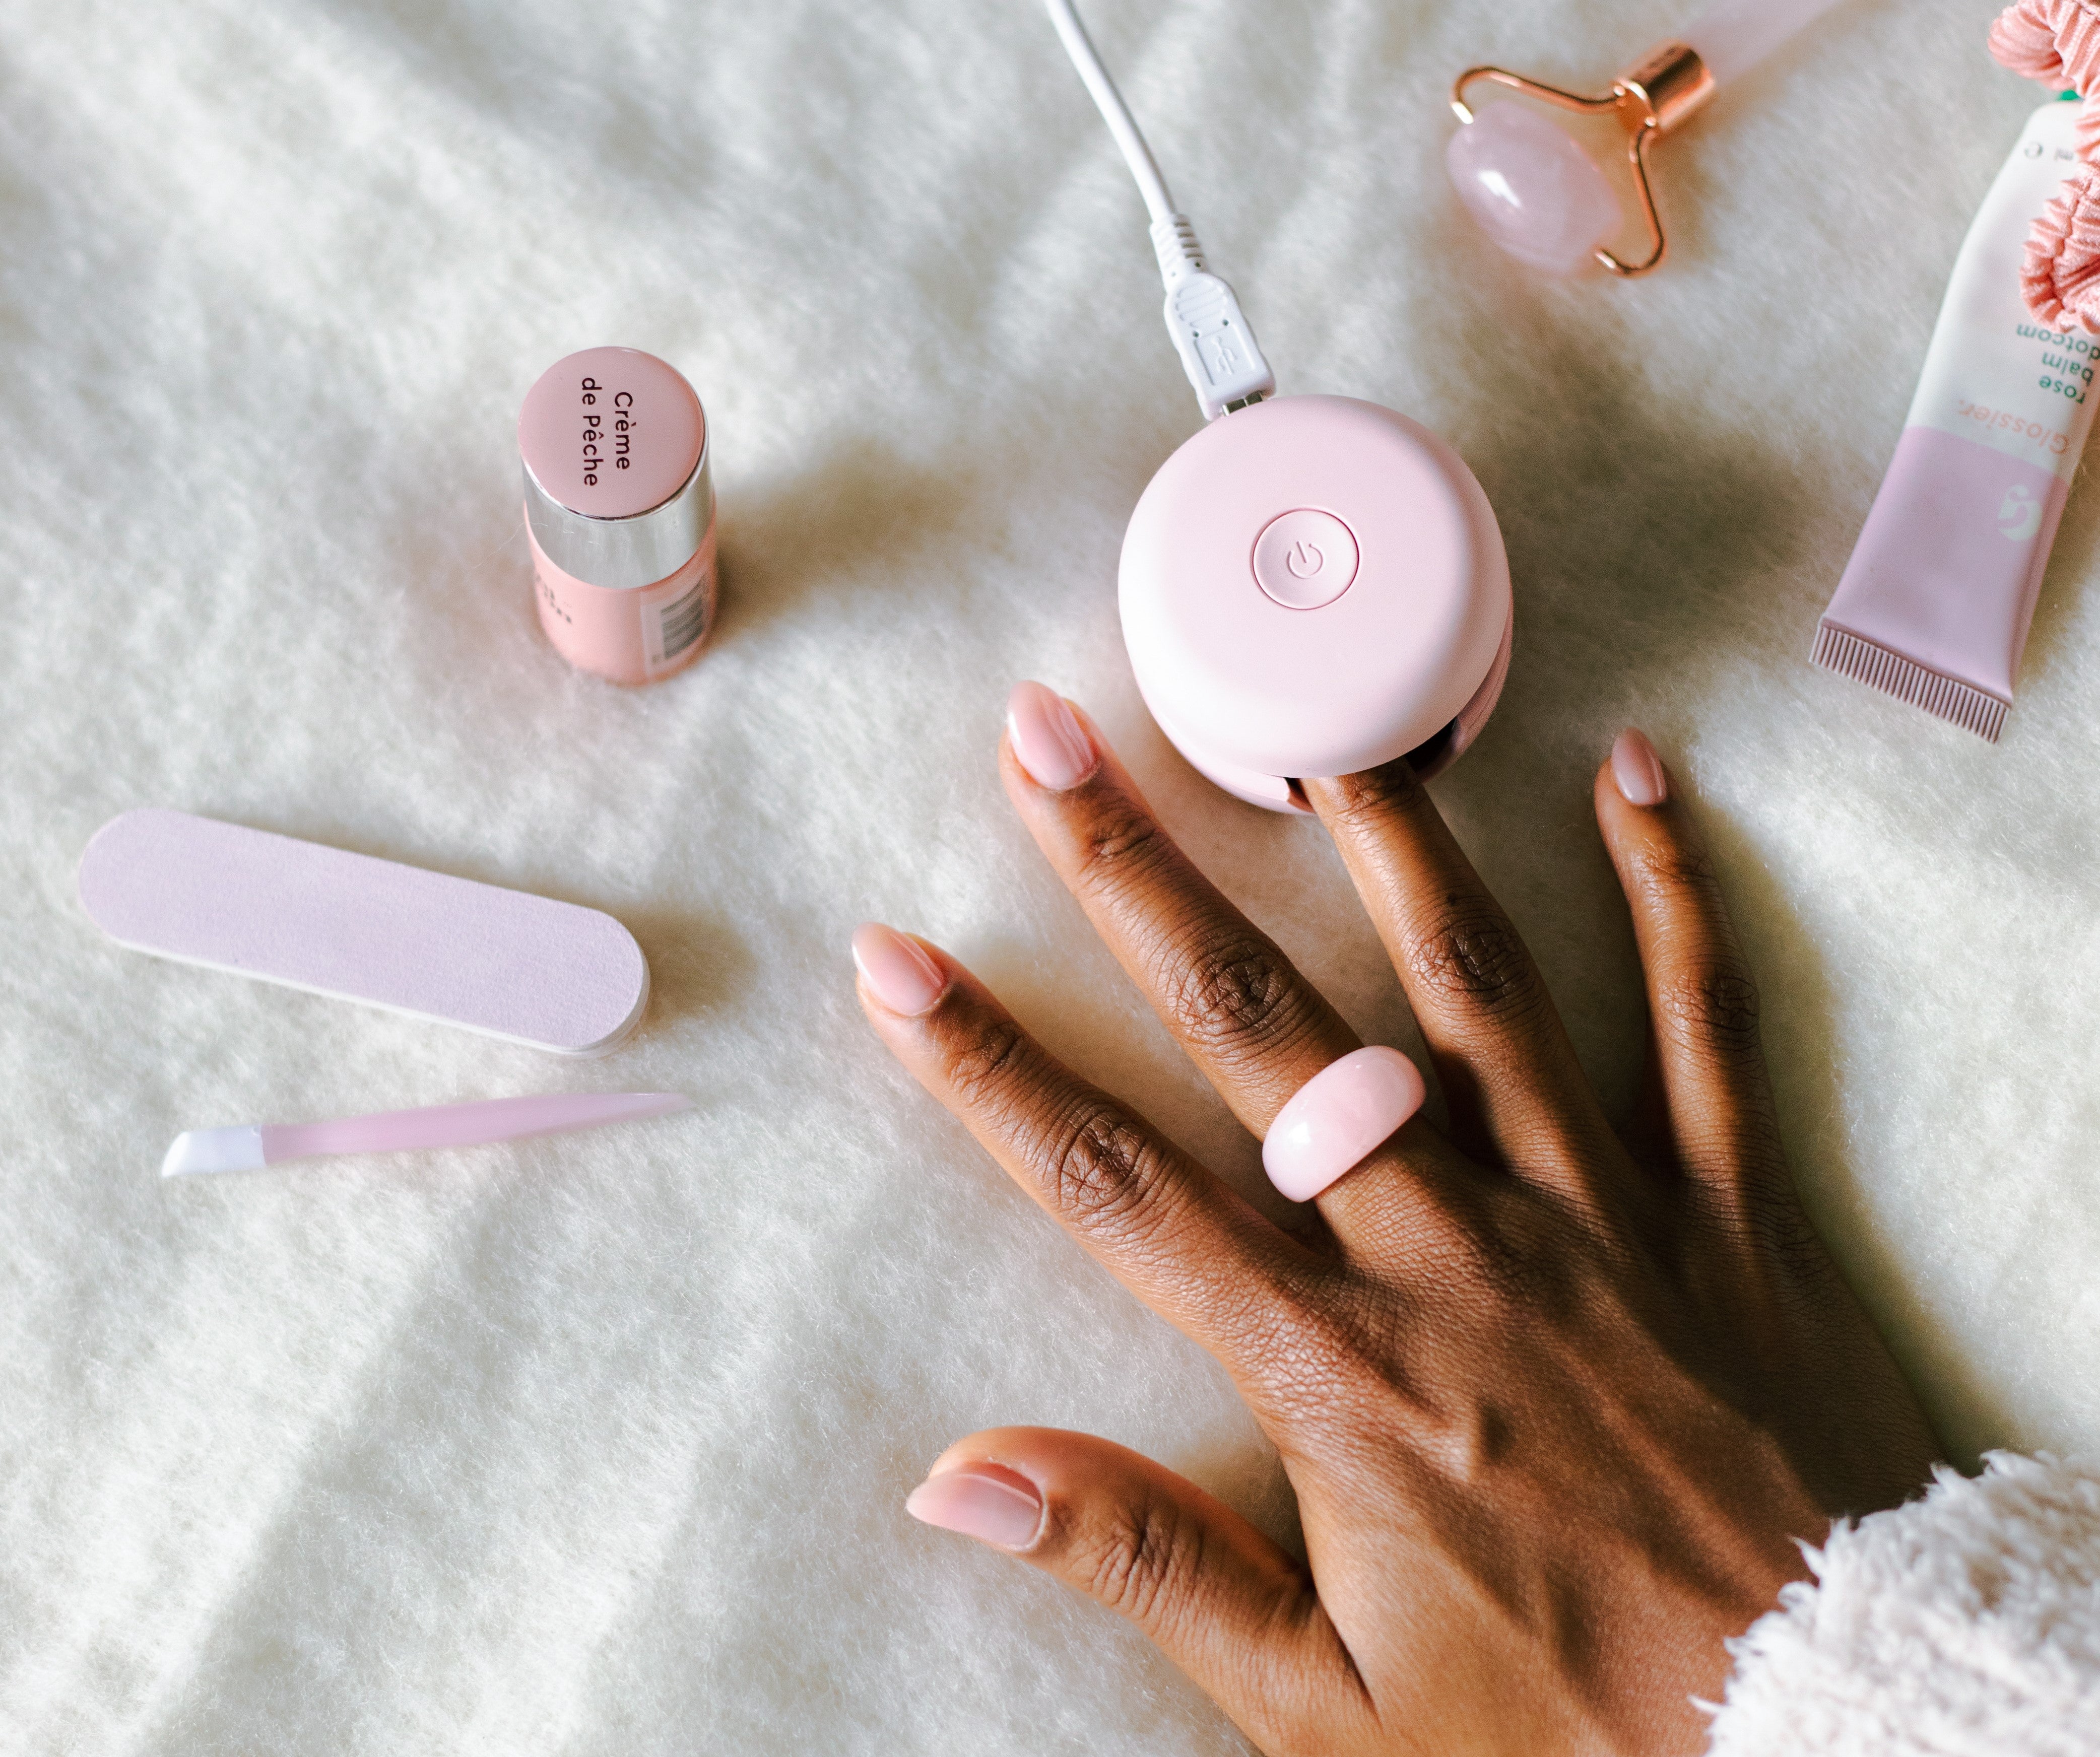 Minimalist nails: less is more for manicure designs